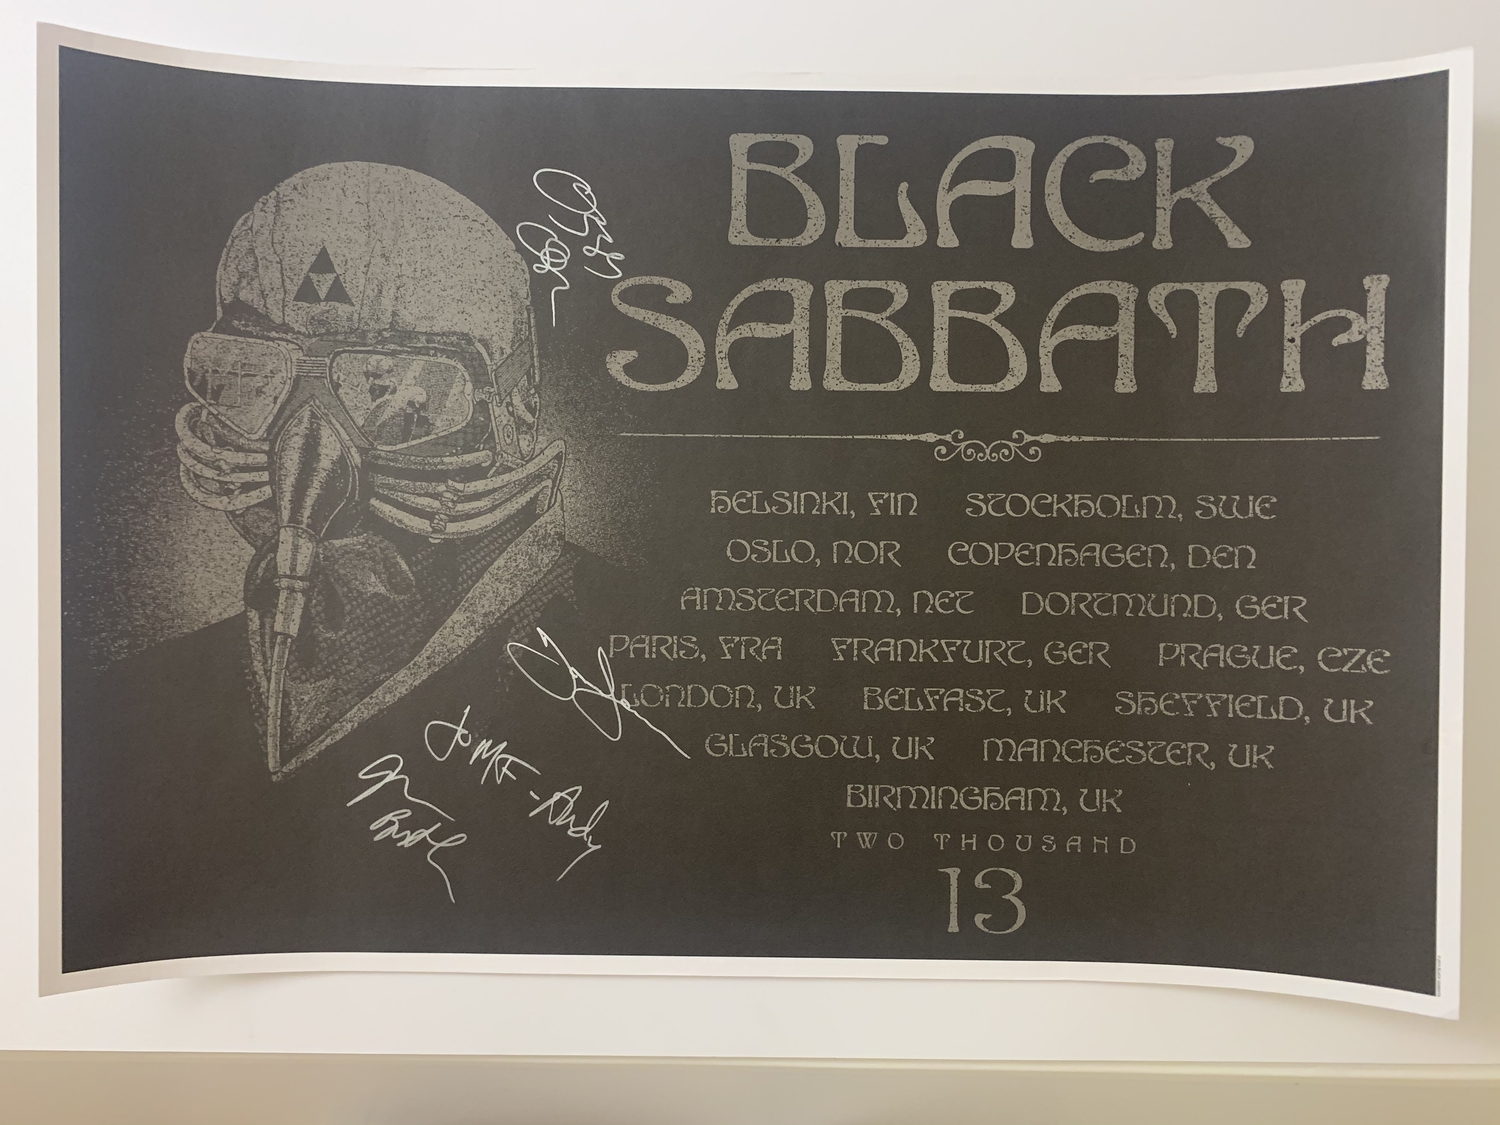 Black Sabbath – 2013 European Tour Poster – Signed and Personalized by Black Sabbath